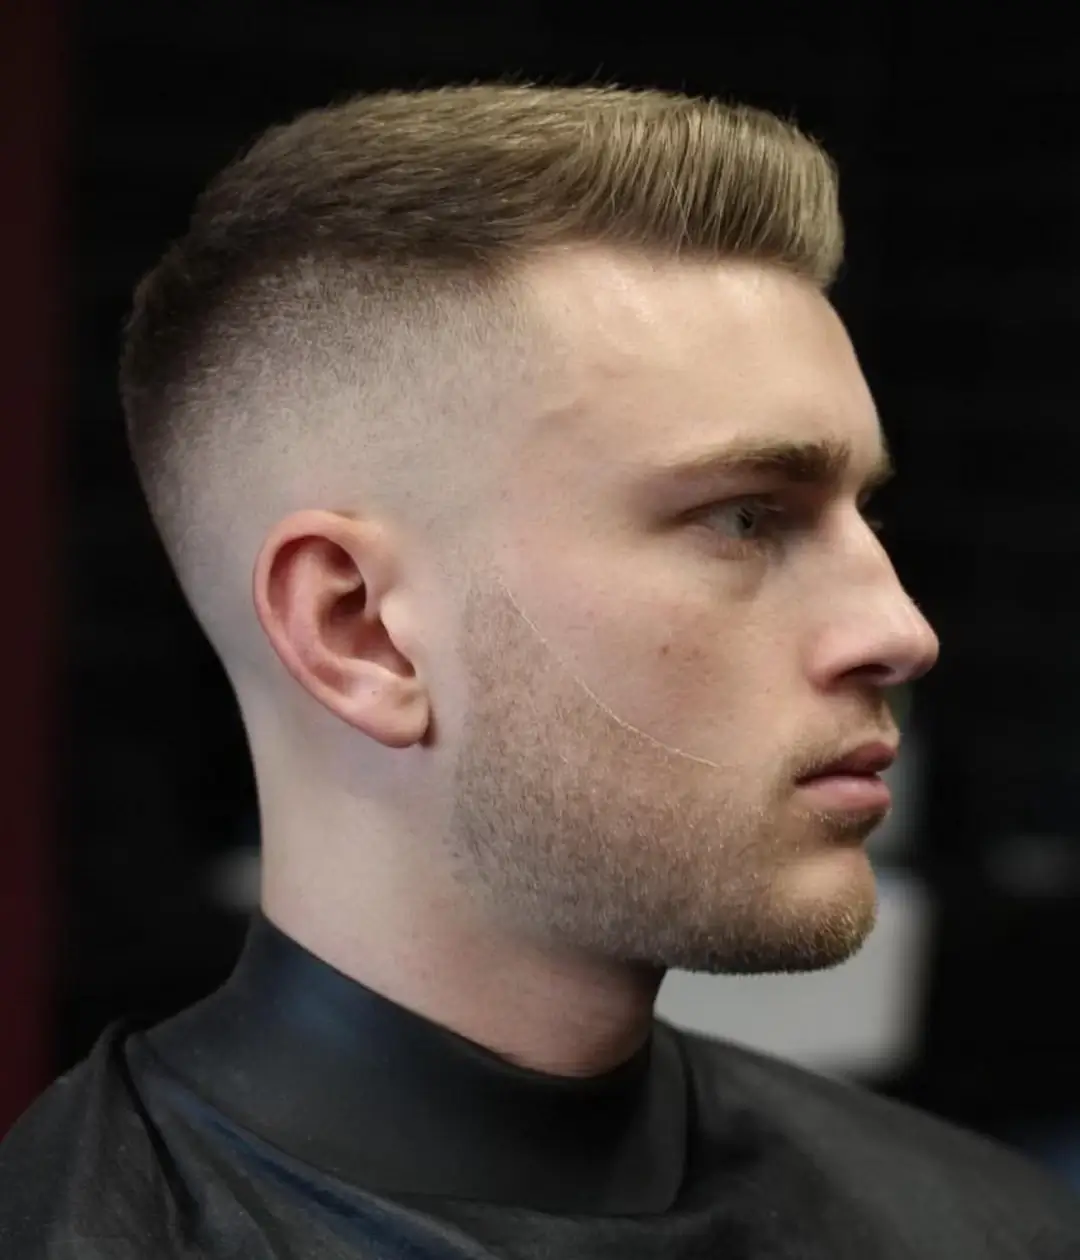 Men's Crew Cut from Fifth Ave Barber Shop in Midtown NYC